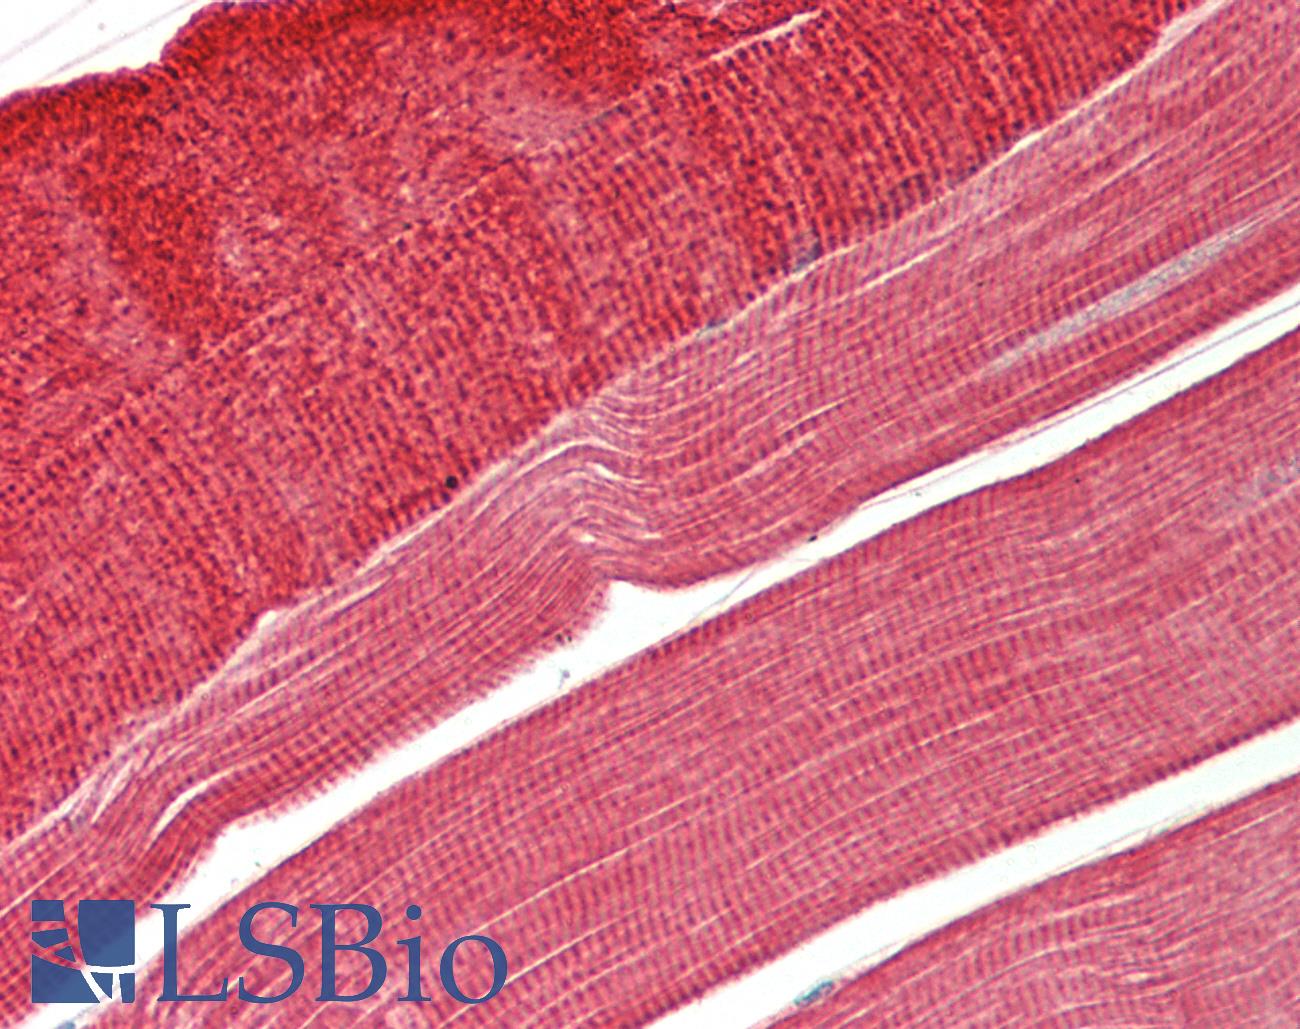 TPM3 Antibody - Human Skeletal Muscle: Formalin-Fixed, Paraffin-Embedded (FFPE)